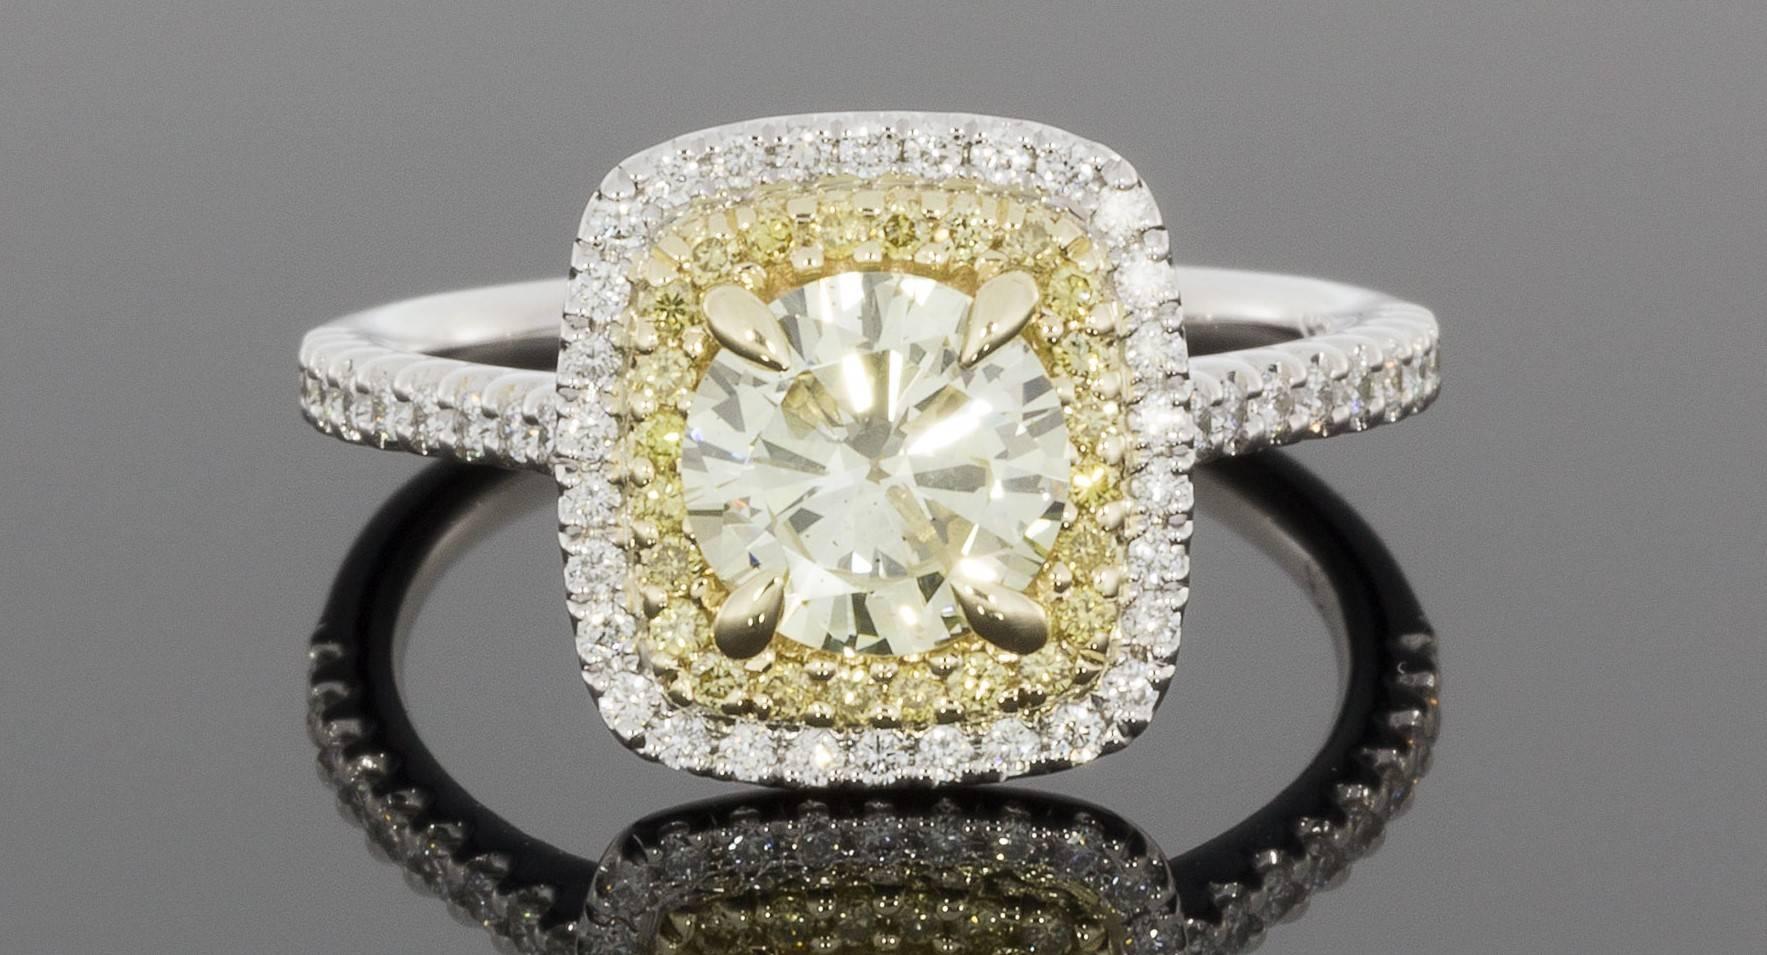 This gorgeous halo engagement ring features a stunning 1.03 carat, canary yellow, round brilliant cut center diamond that is prong set in a yellow gold head on a custom made ring. This center diamond grades as Fancy Light Yellow in color, is very